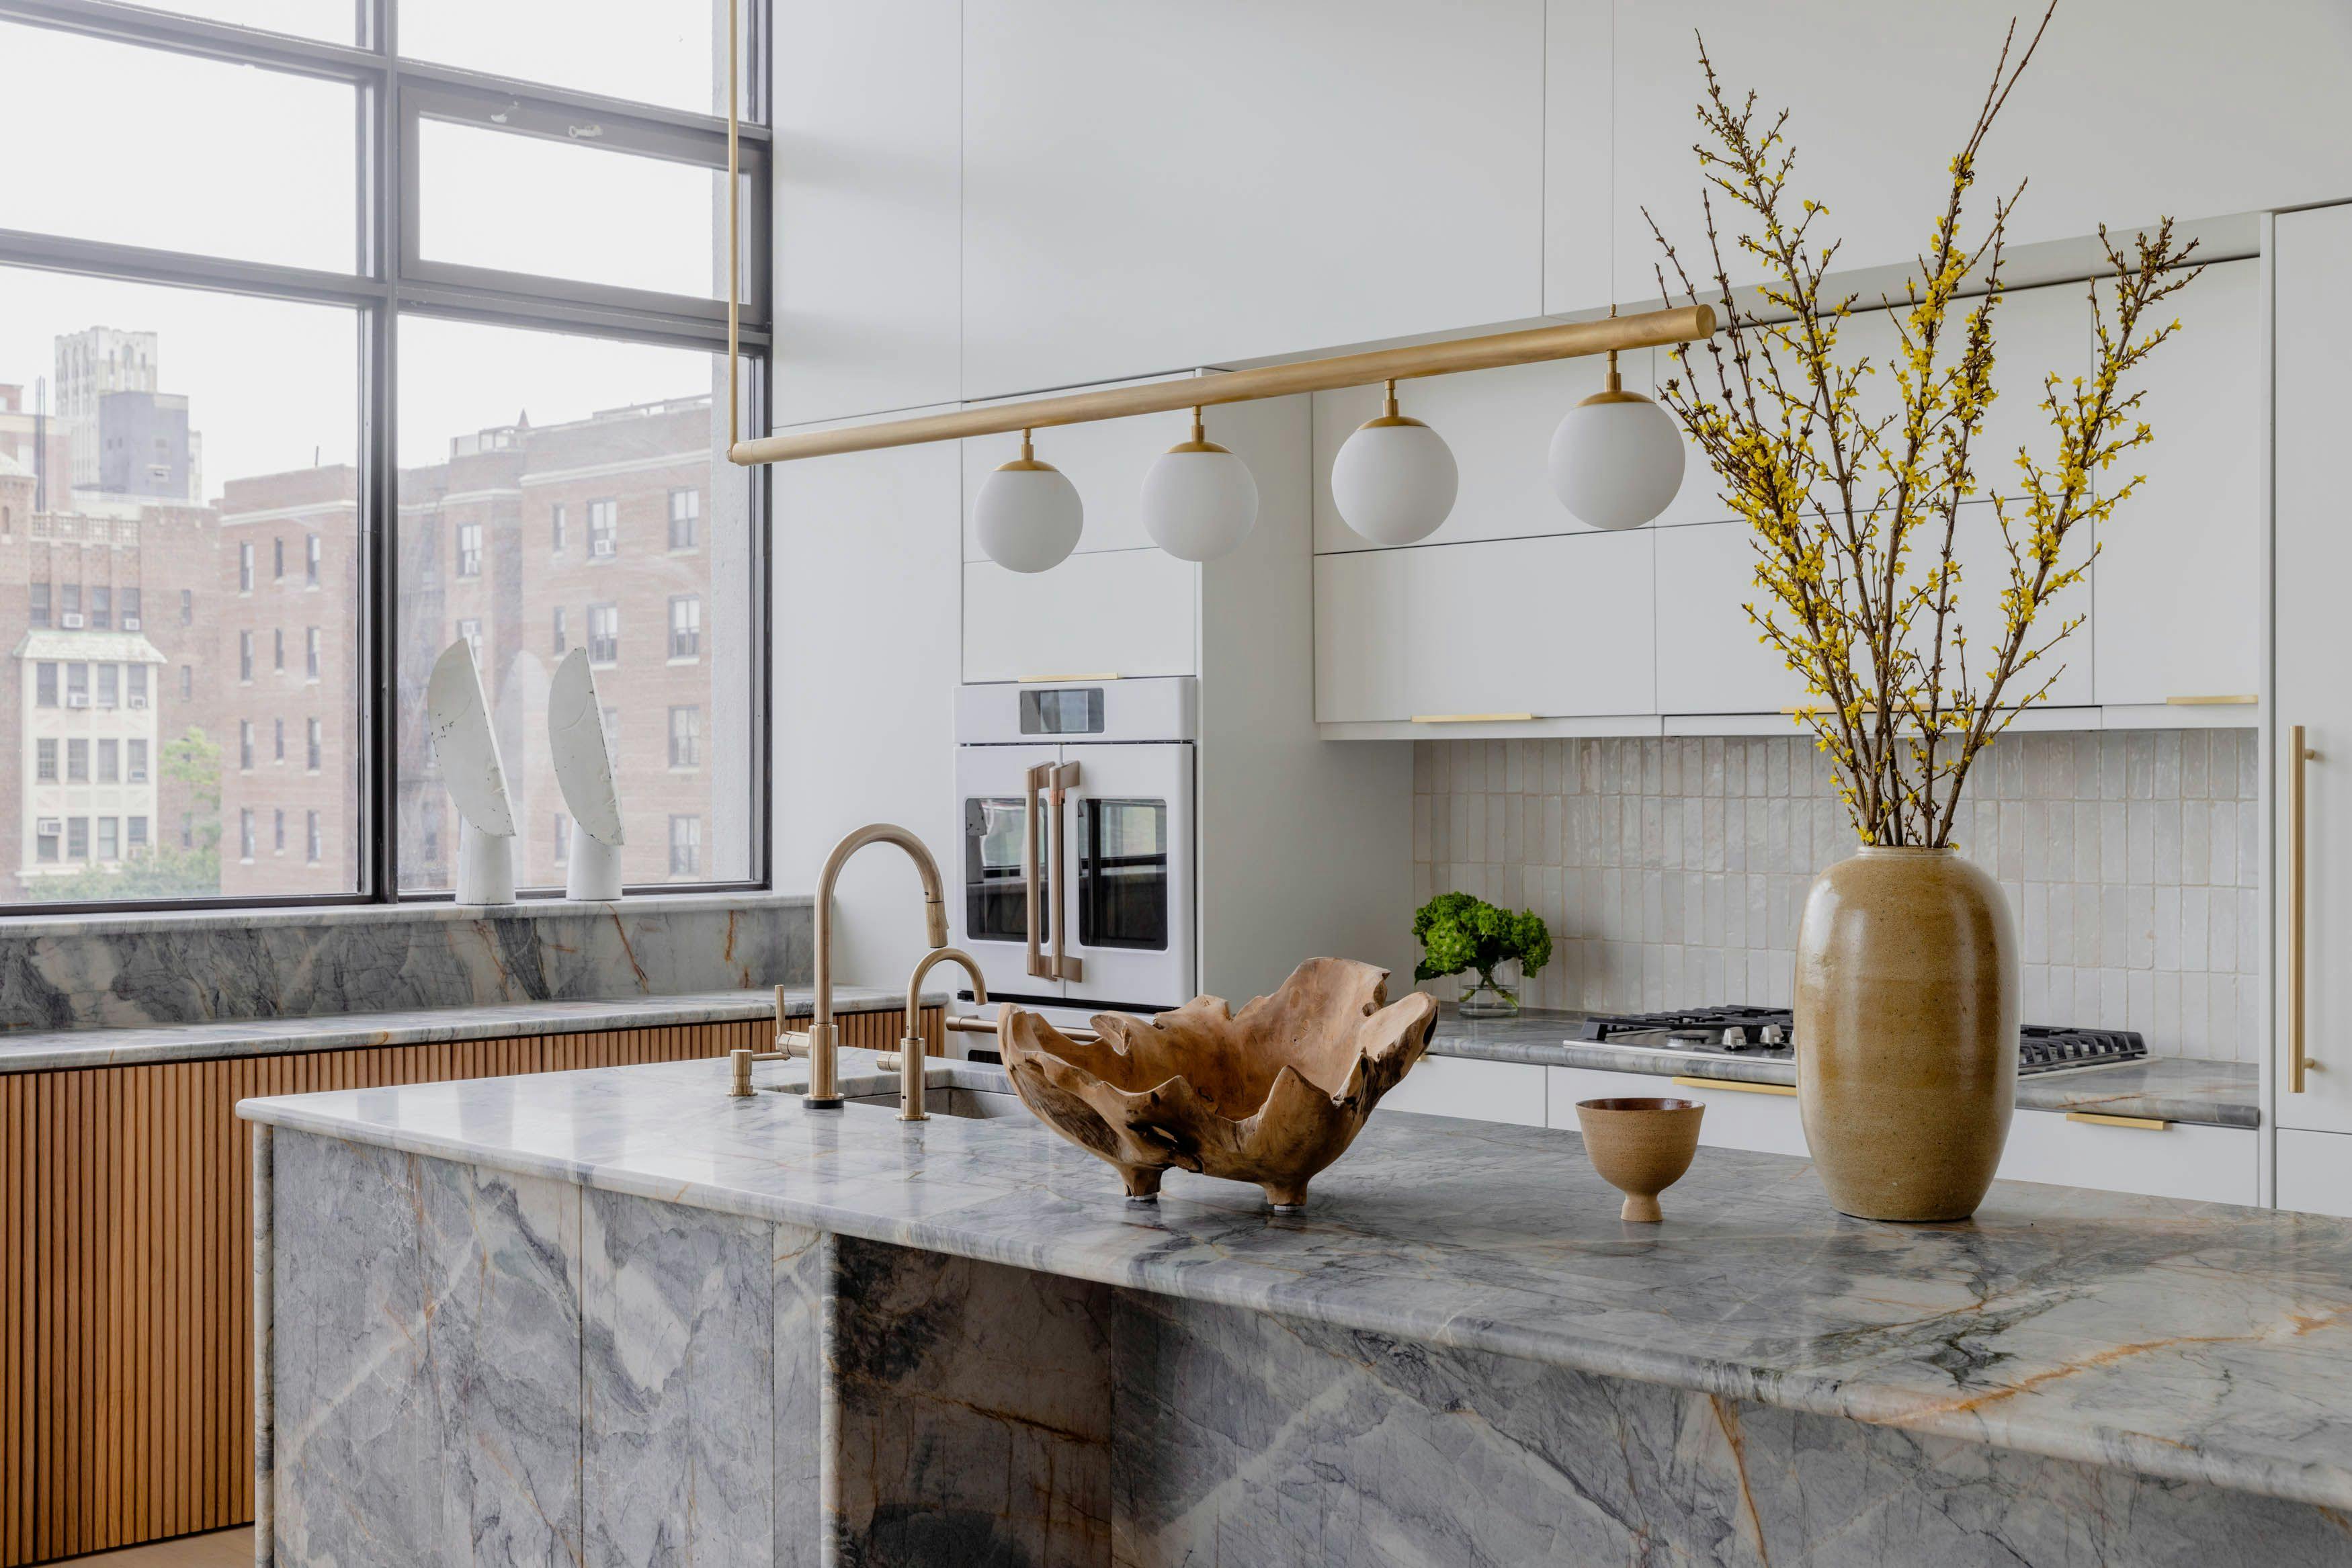 A kitchen with marble countertops and a vase of flowers, set in an airy loft overlooking the Brooklyn Bridge.